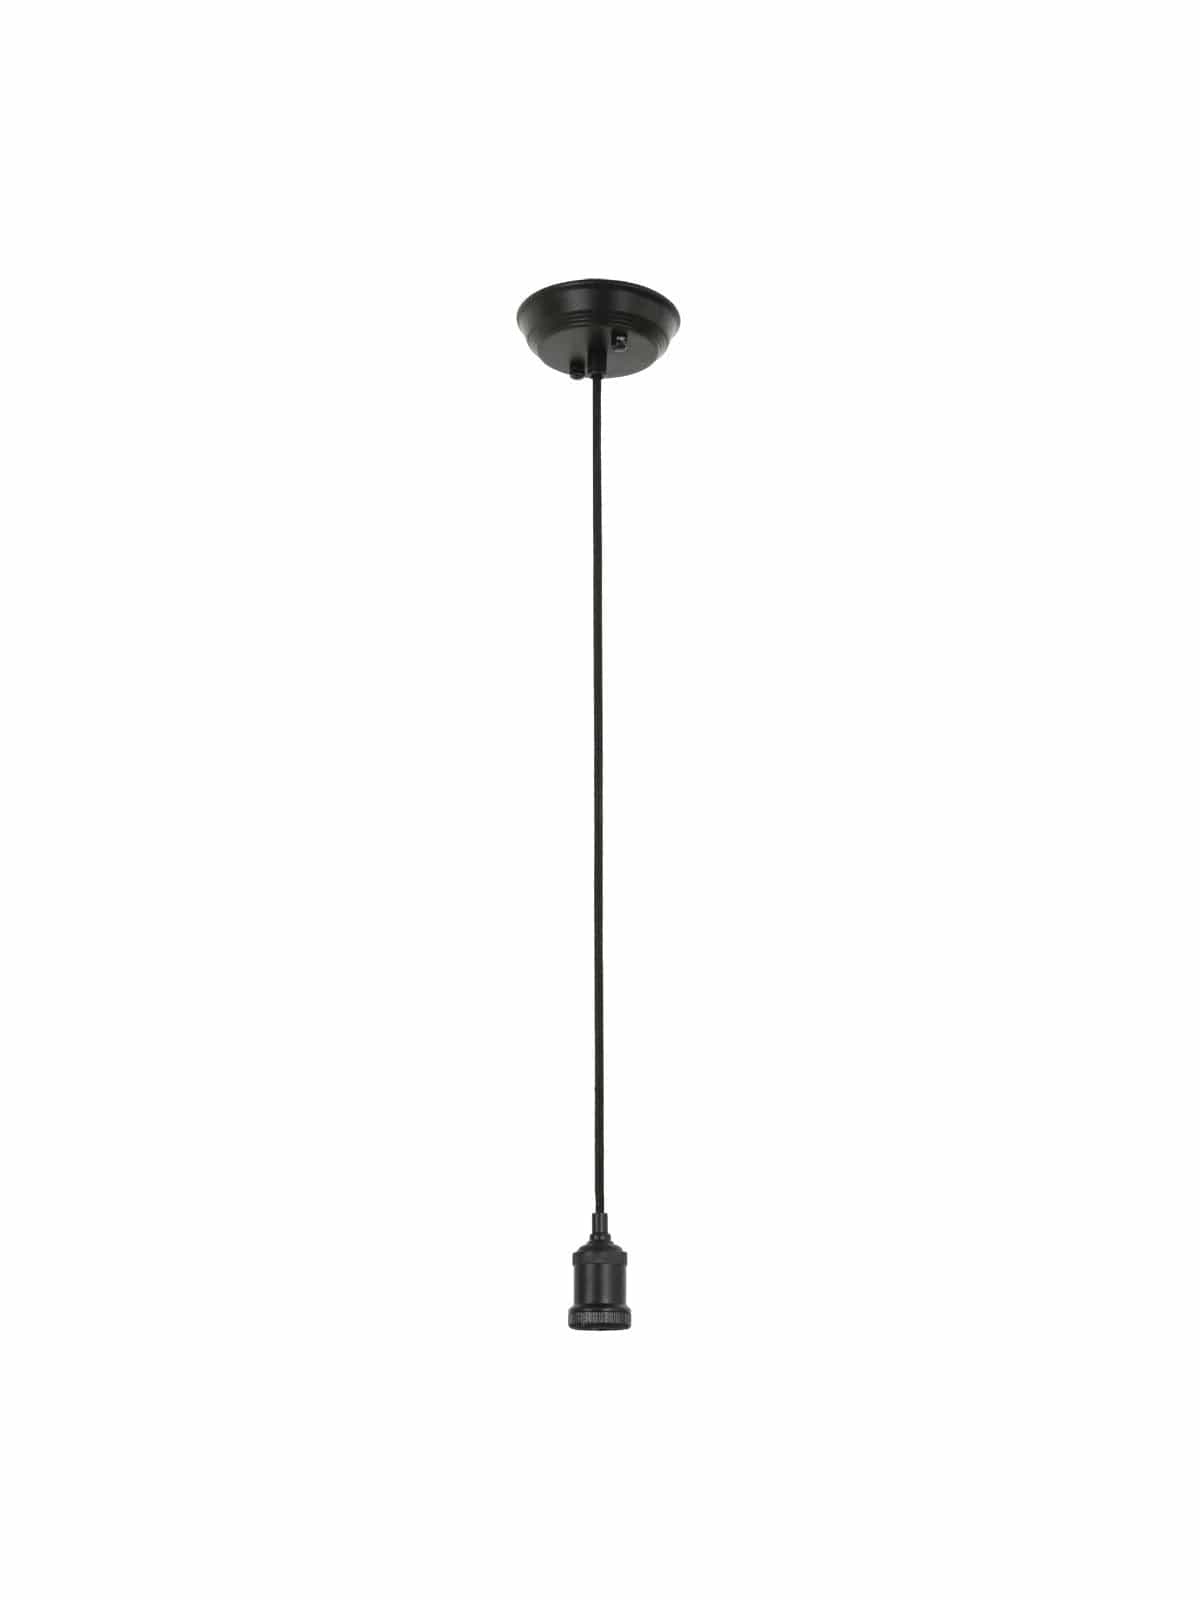 Lode Lighting Lighting Accessories Patina Black Single Cloth Cord Suspension Set Complete With Lamp Holder Lights-For-You 3026009